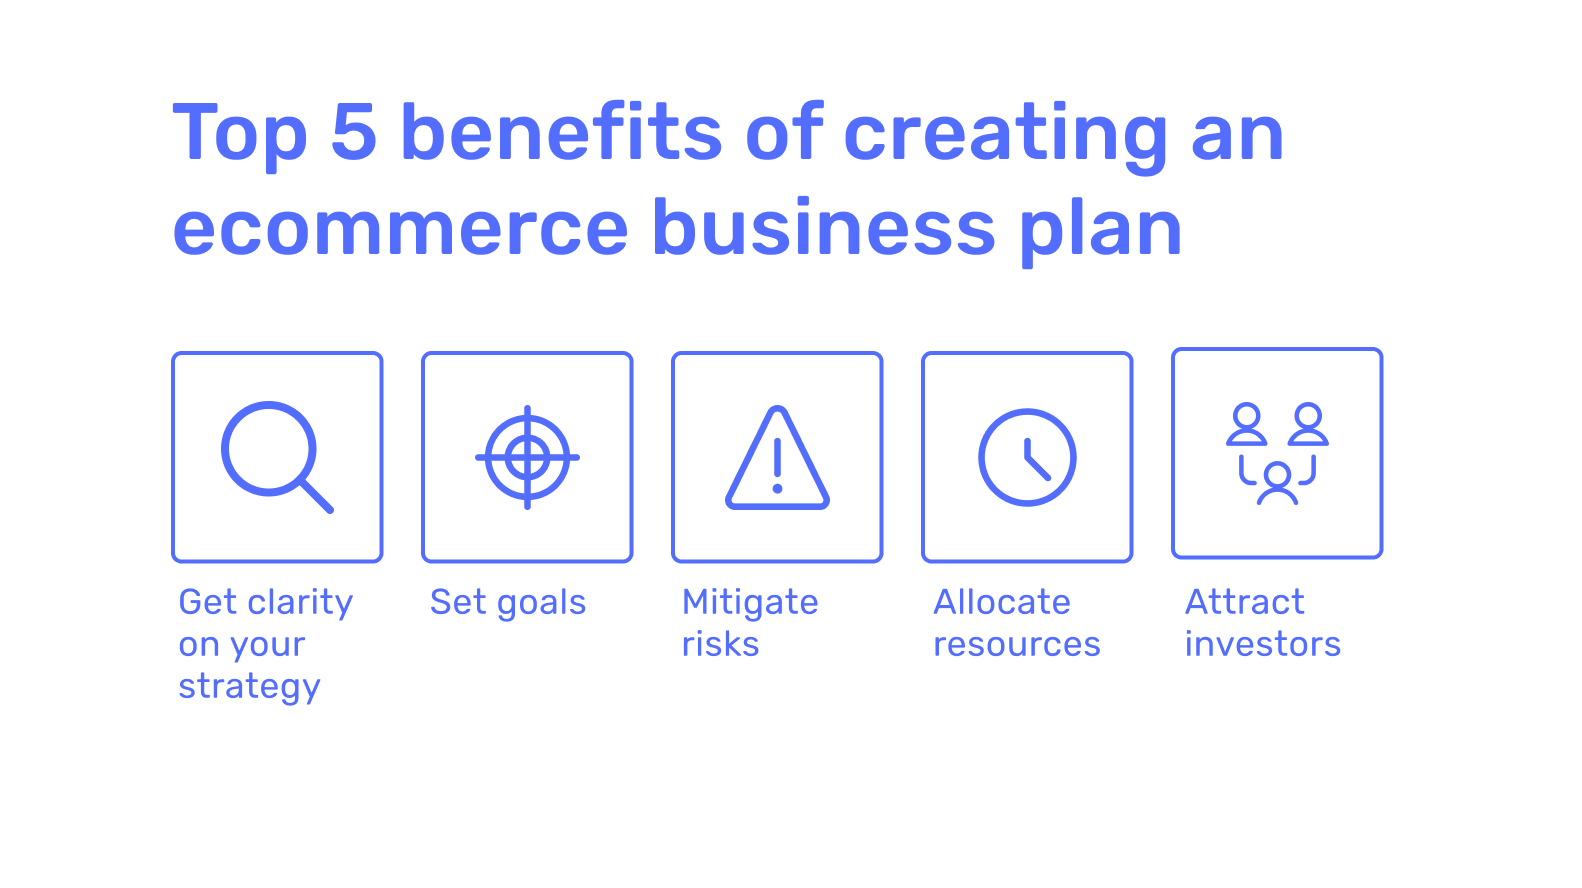 5 benefits of creating an ecommerce business plan